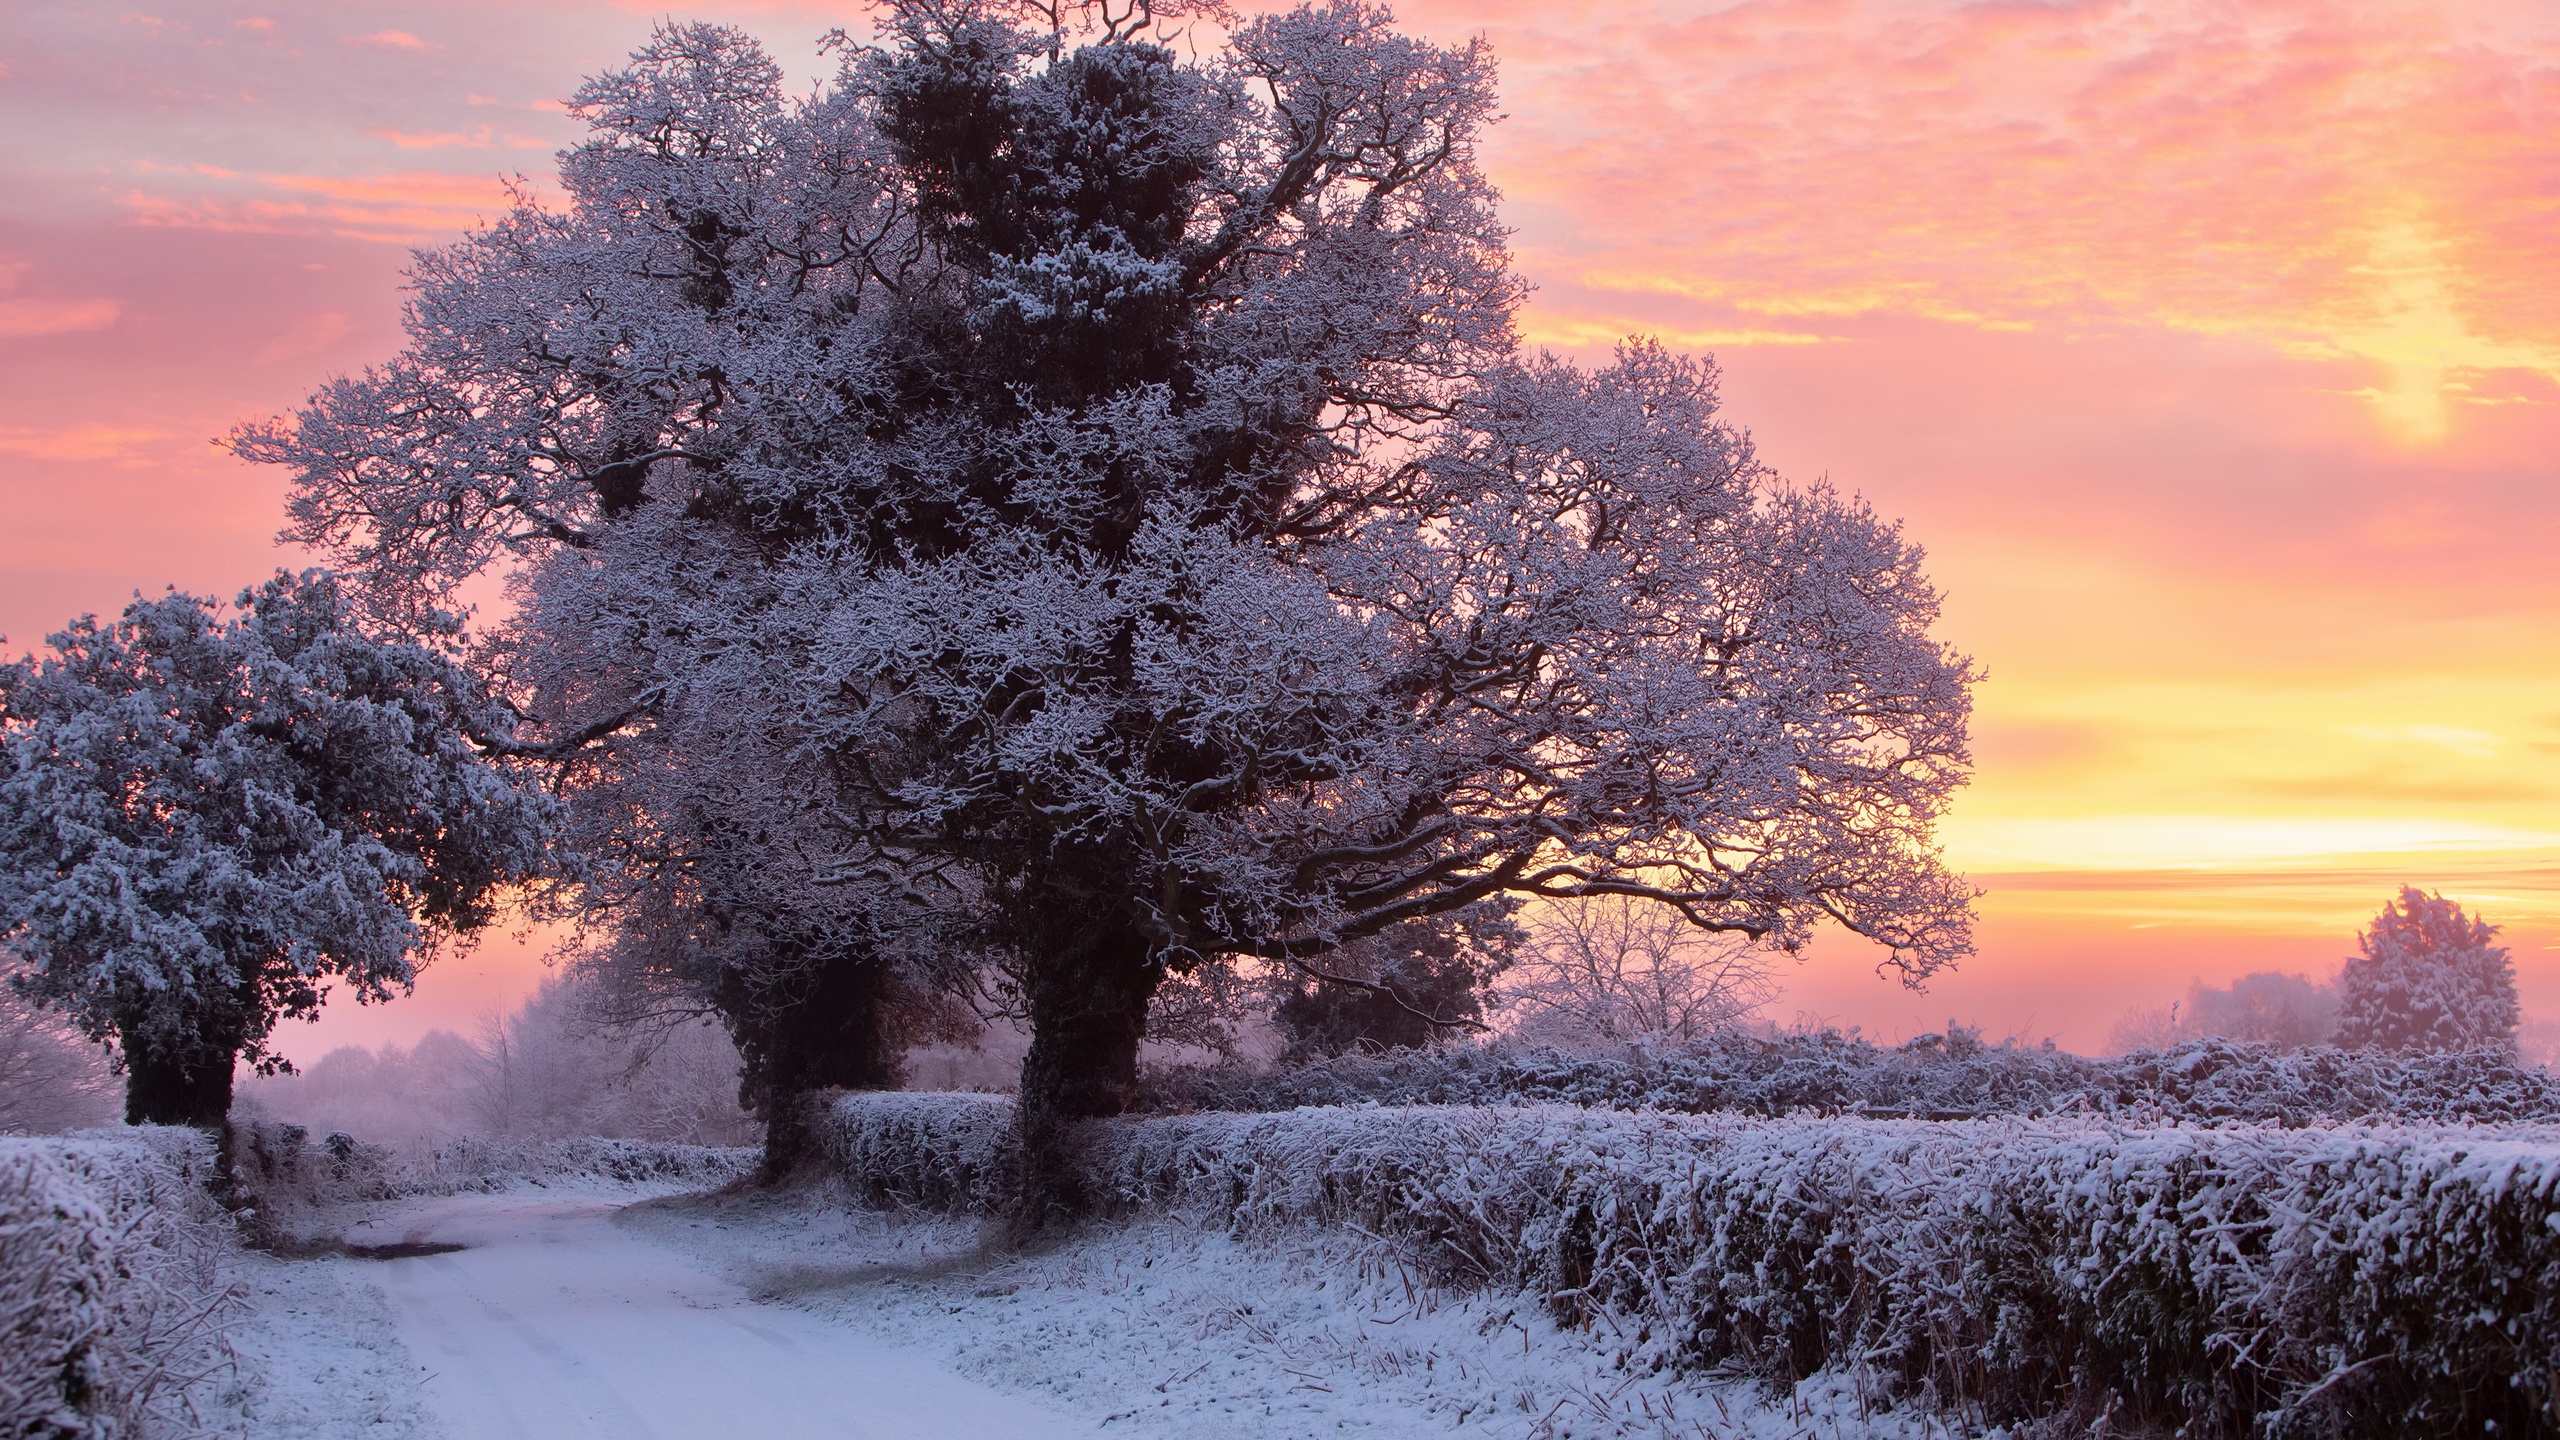 Outdoors Winter Cold Ice Frost Snow Orange Sky Nature Sunlight Trees 2560x1440